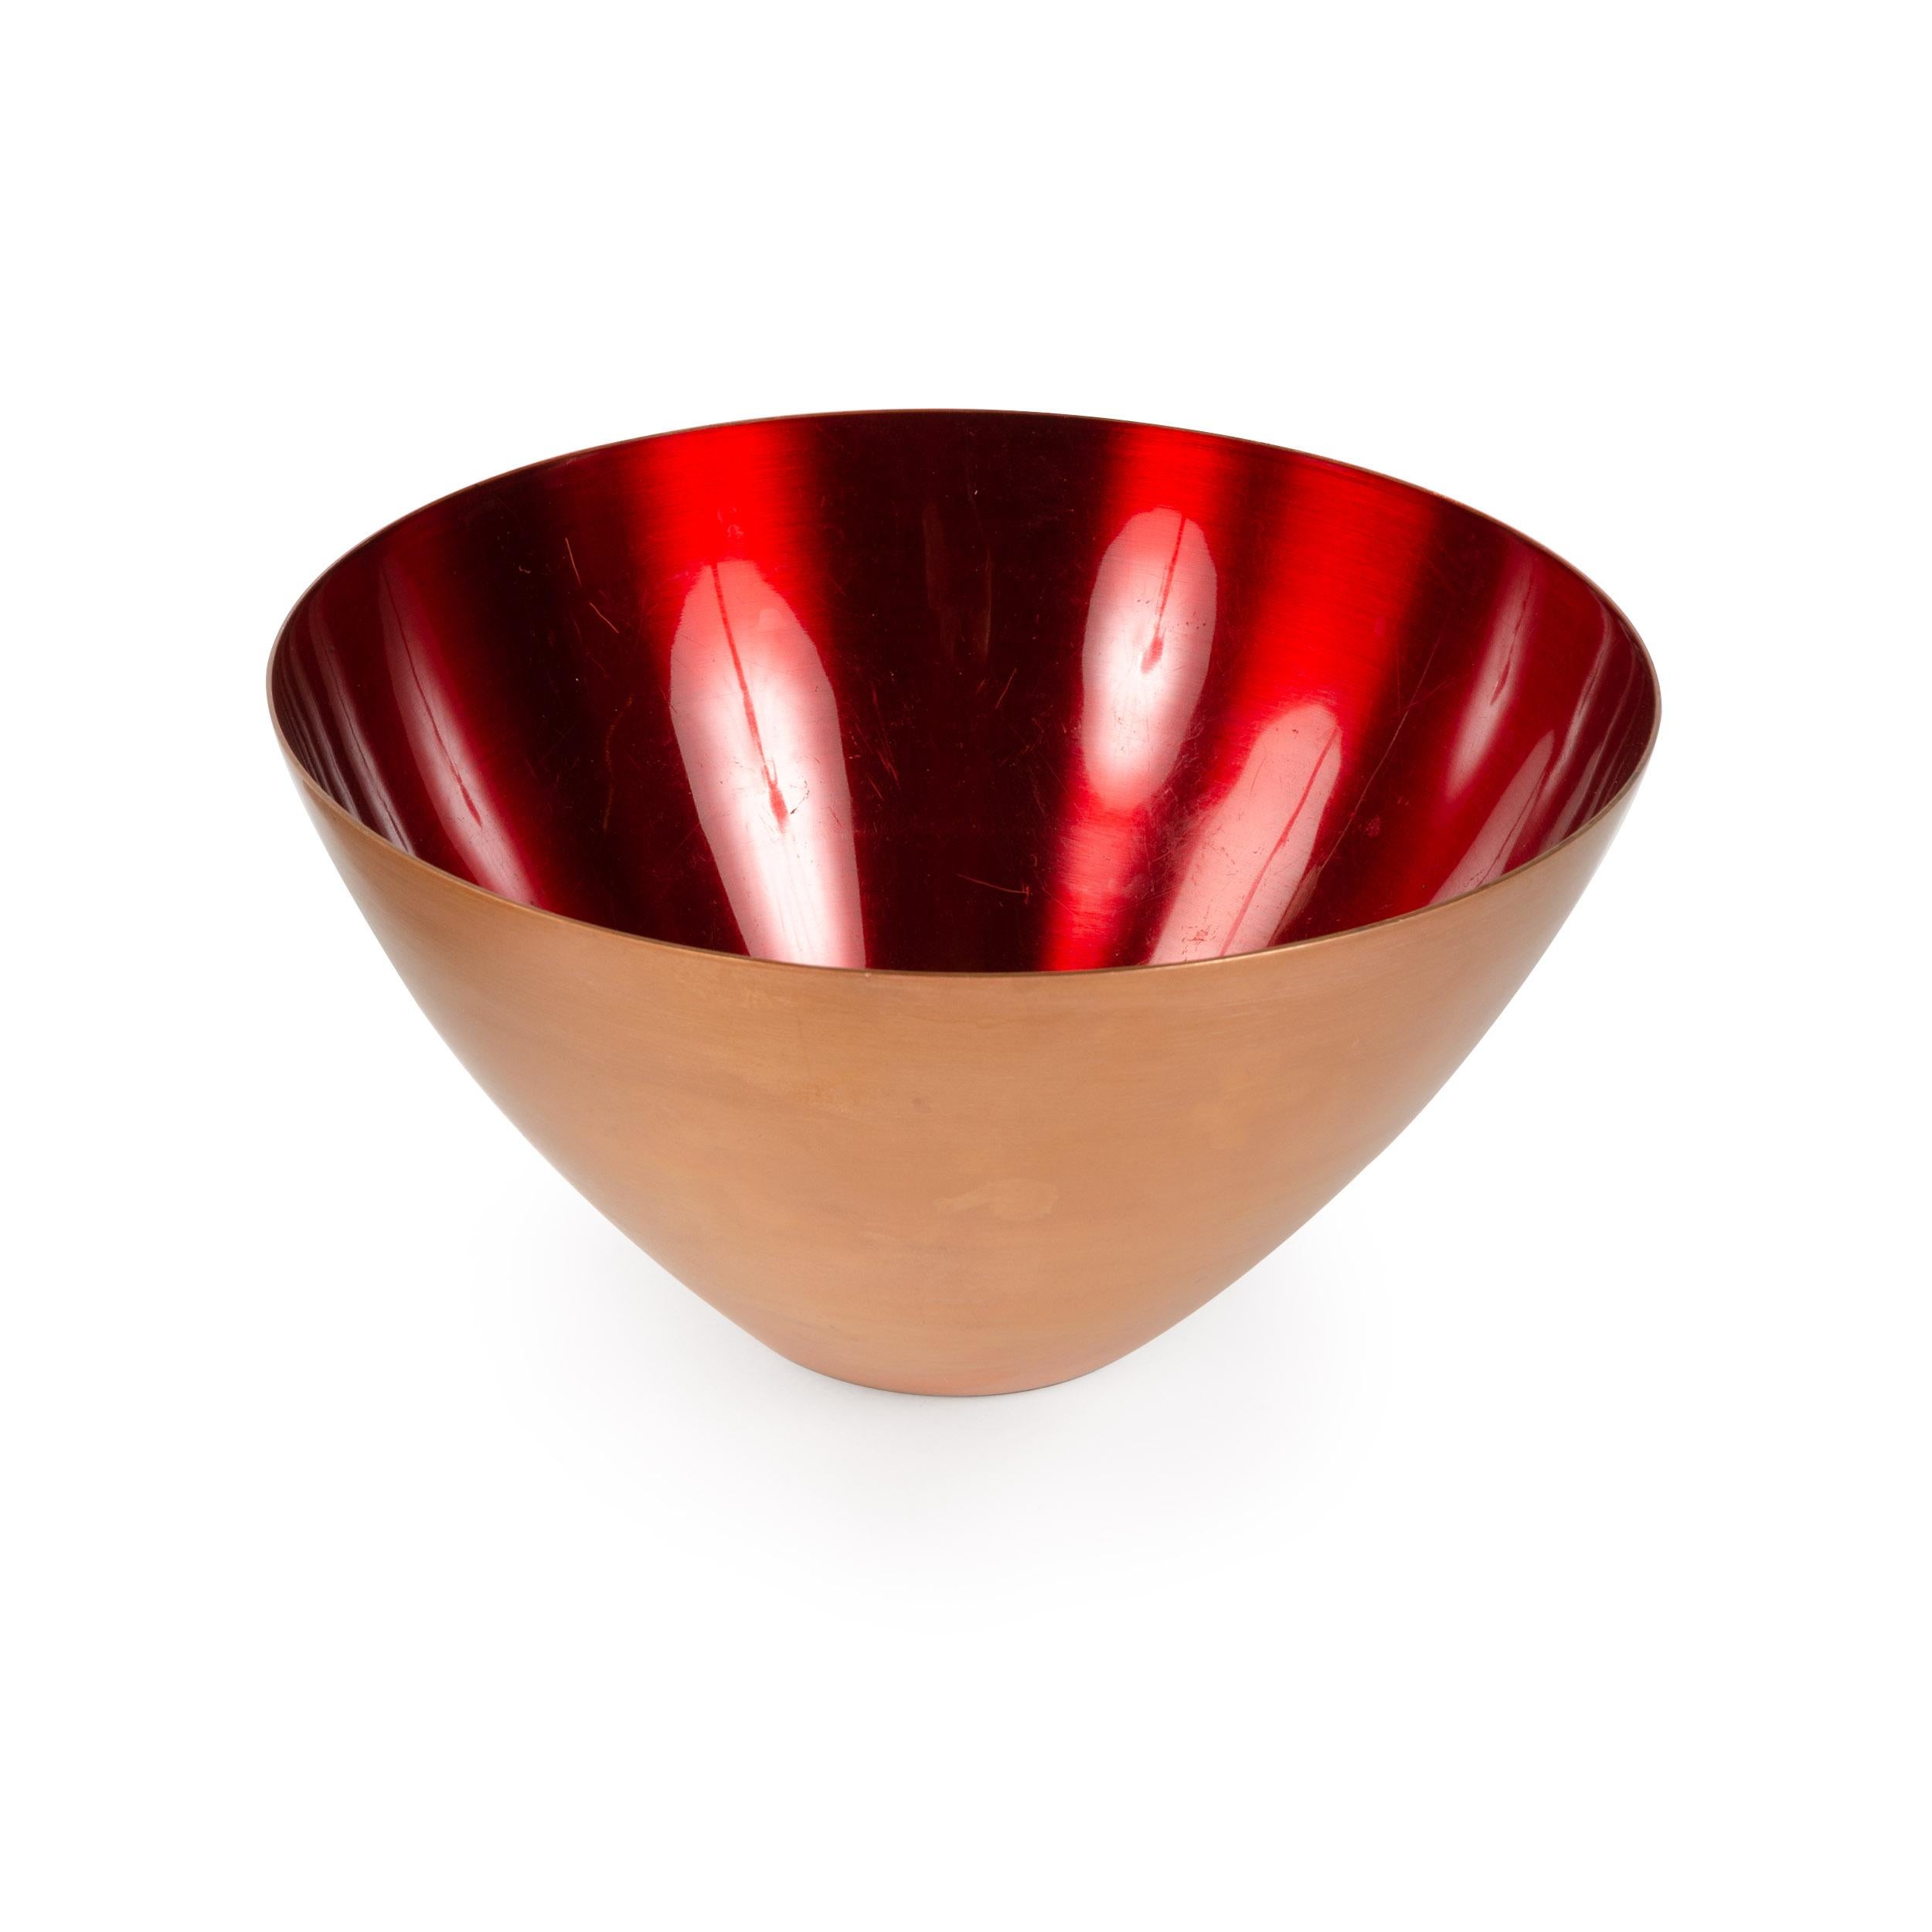 A large, deep spun copper bowl with flared exterior and vibrant red enamel interior.